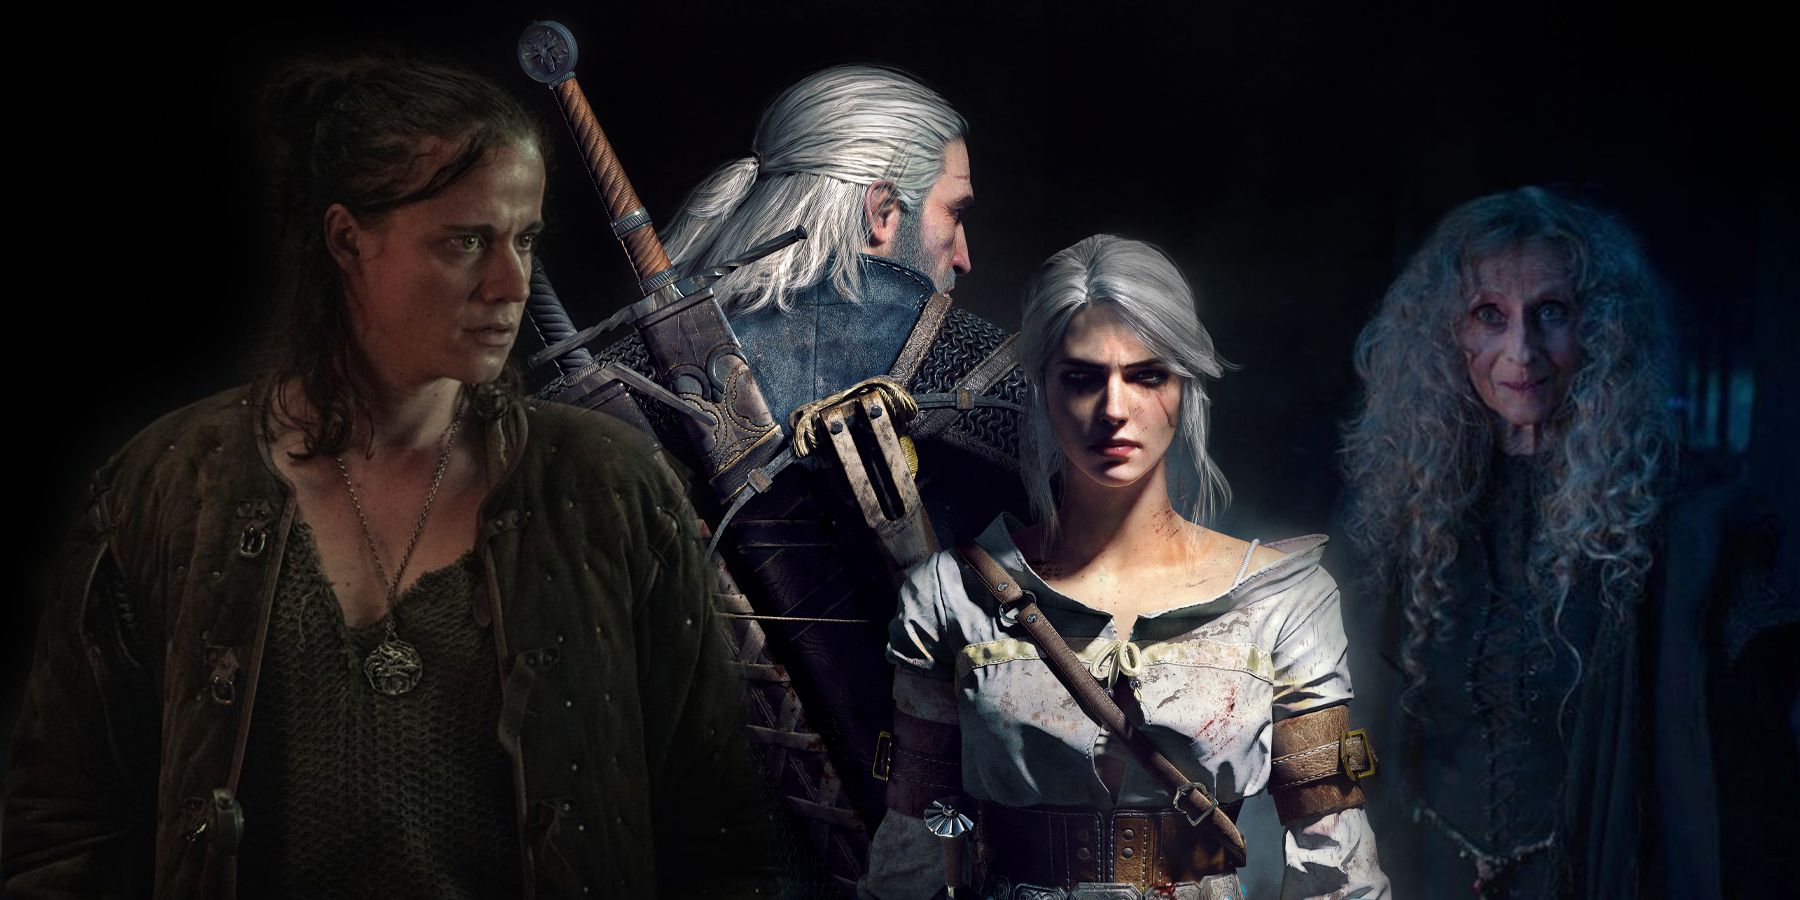 Eskel, Geralt, Ciri, and Voleth Meir from The Witcher franchise. (Eskel and Voleth Meir as they are depicted in The Witcher show on Netflix and Ciri and Geralt as they are depicted in The Witcher 3: Wild Hunt.)